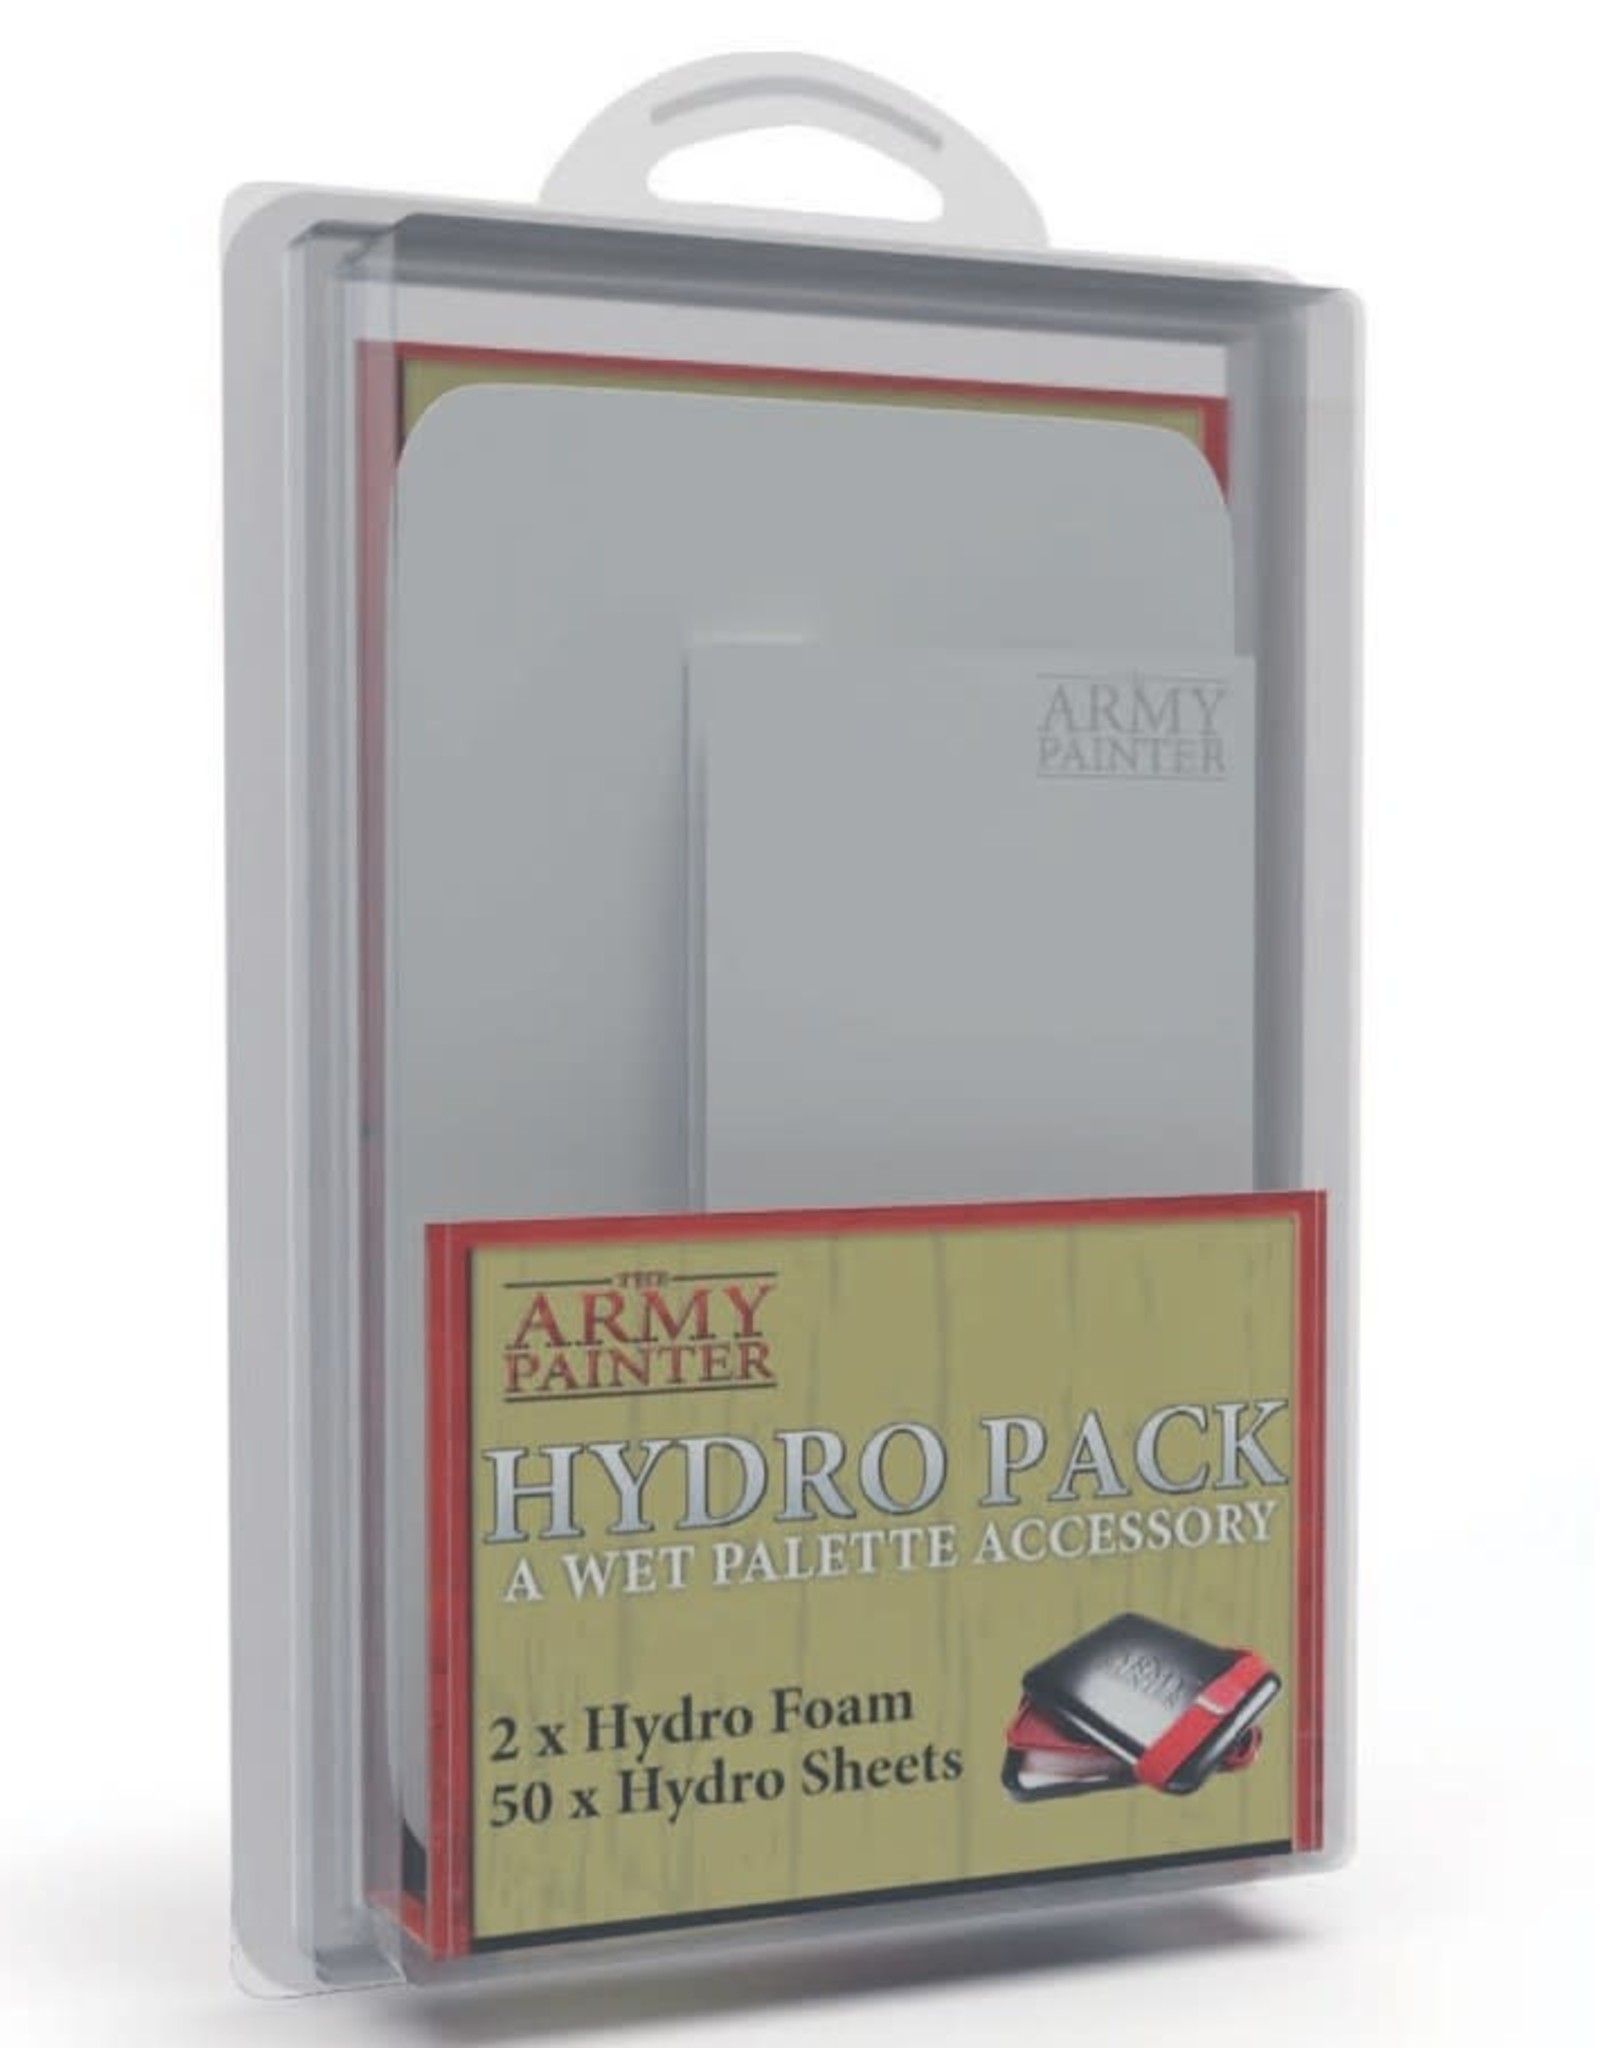 The Army Painter TAP Wet Palette Hydro Pack